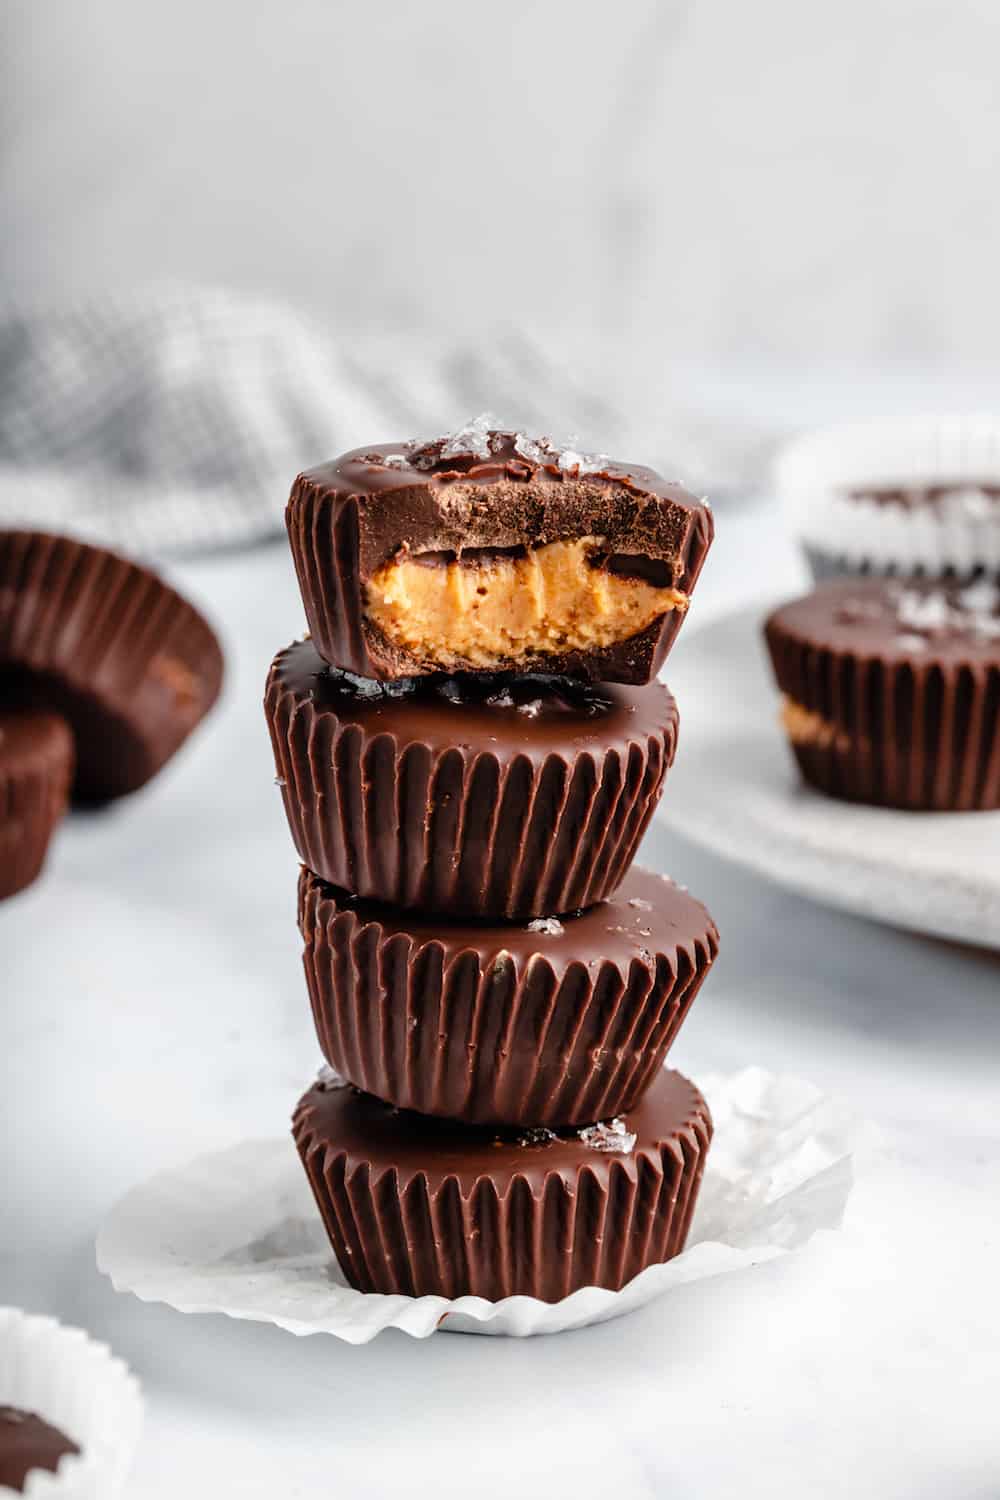 Four Vegan Peanut Butter Cups Piled On Top of One Another